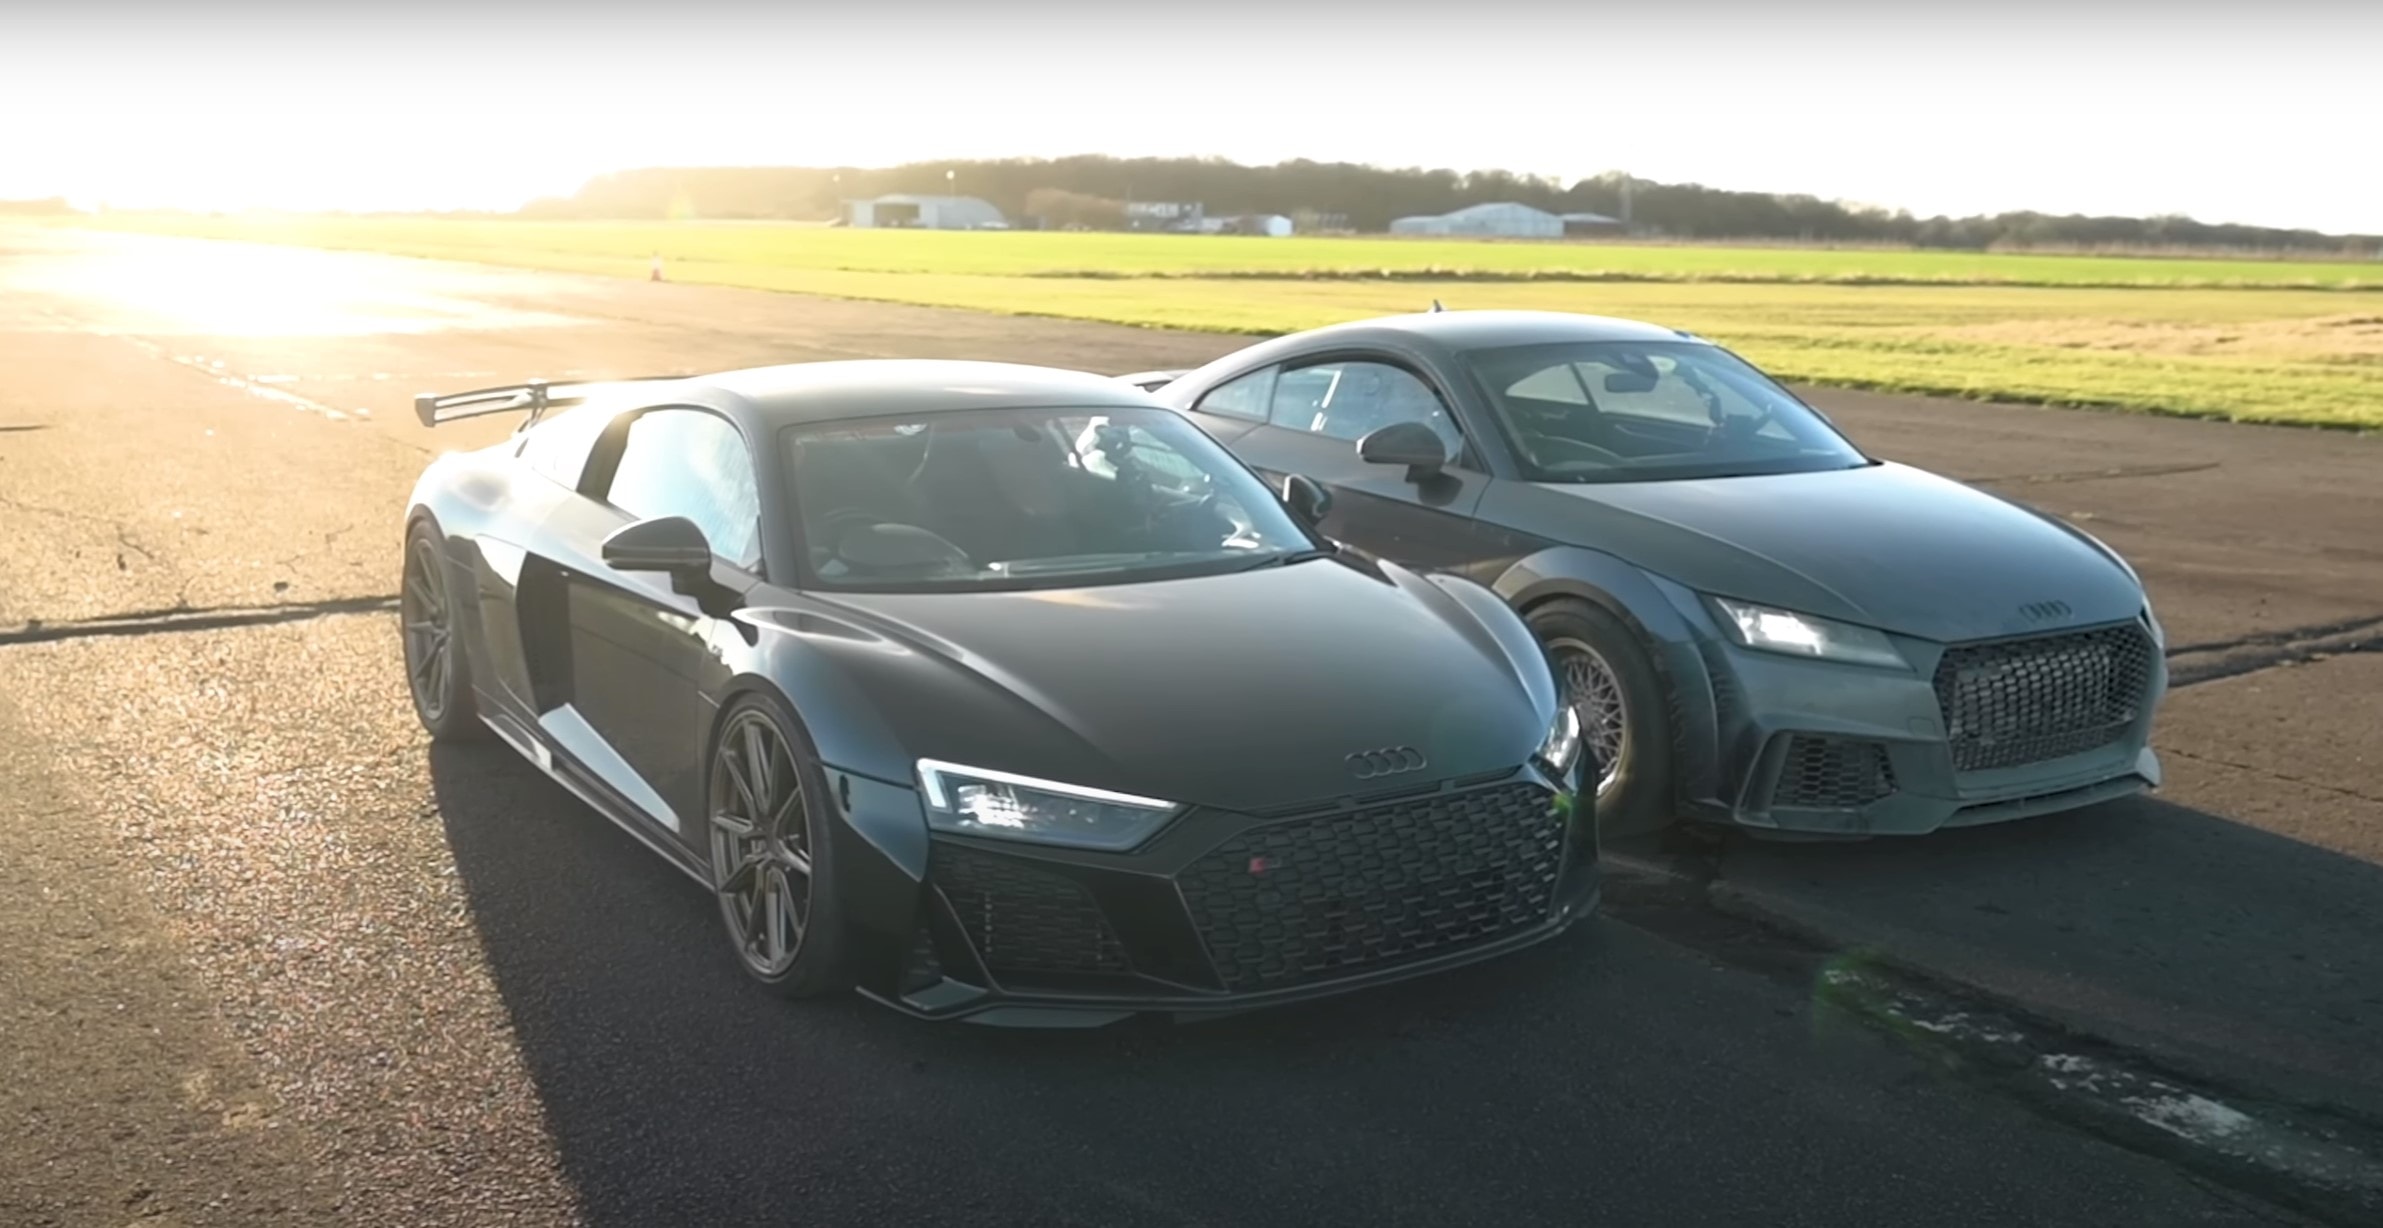 This Photo Finish 2,000HP Race Sees the Audi Take On Its TT RS Baby Brother - autoevolution